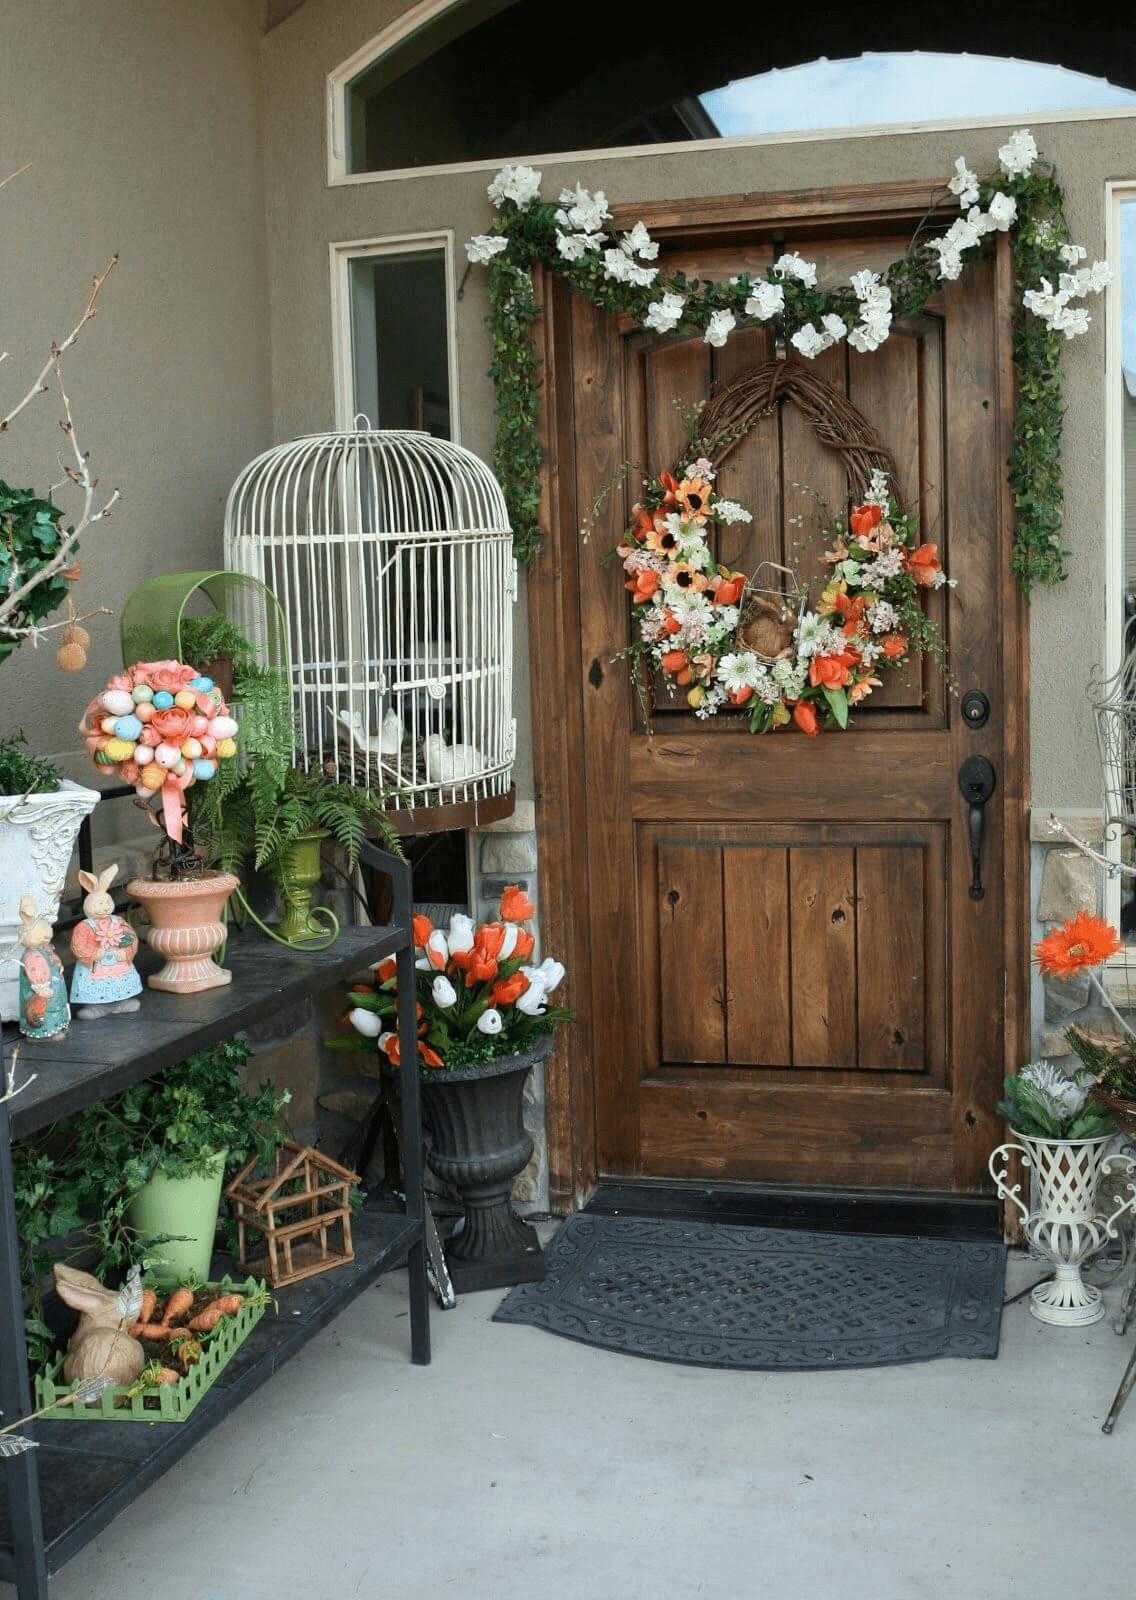 DIY Porch Decorating Ideas
 Great Tips on How to Decorate a Small Front Porch